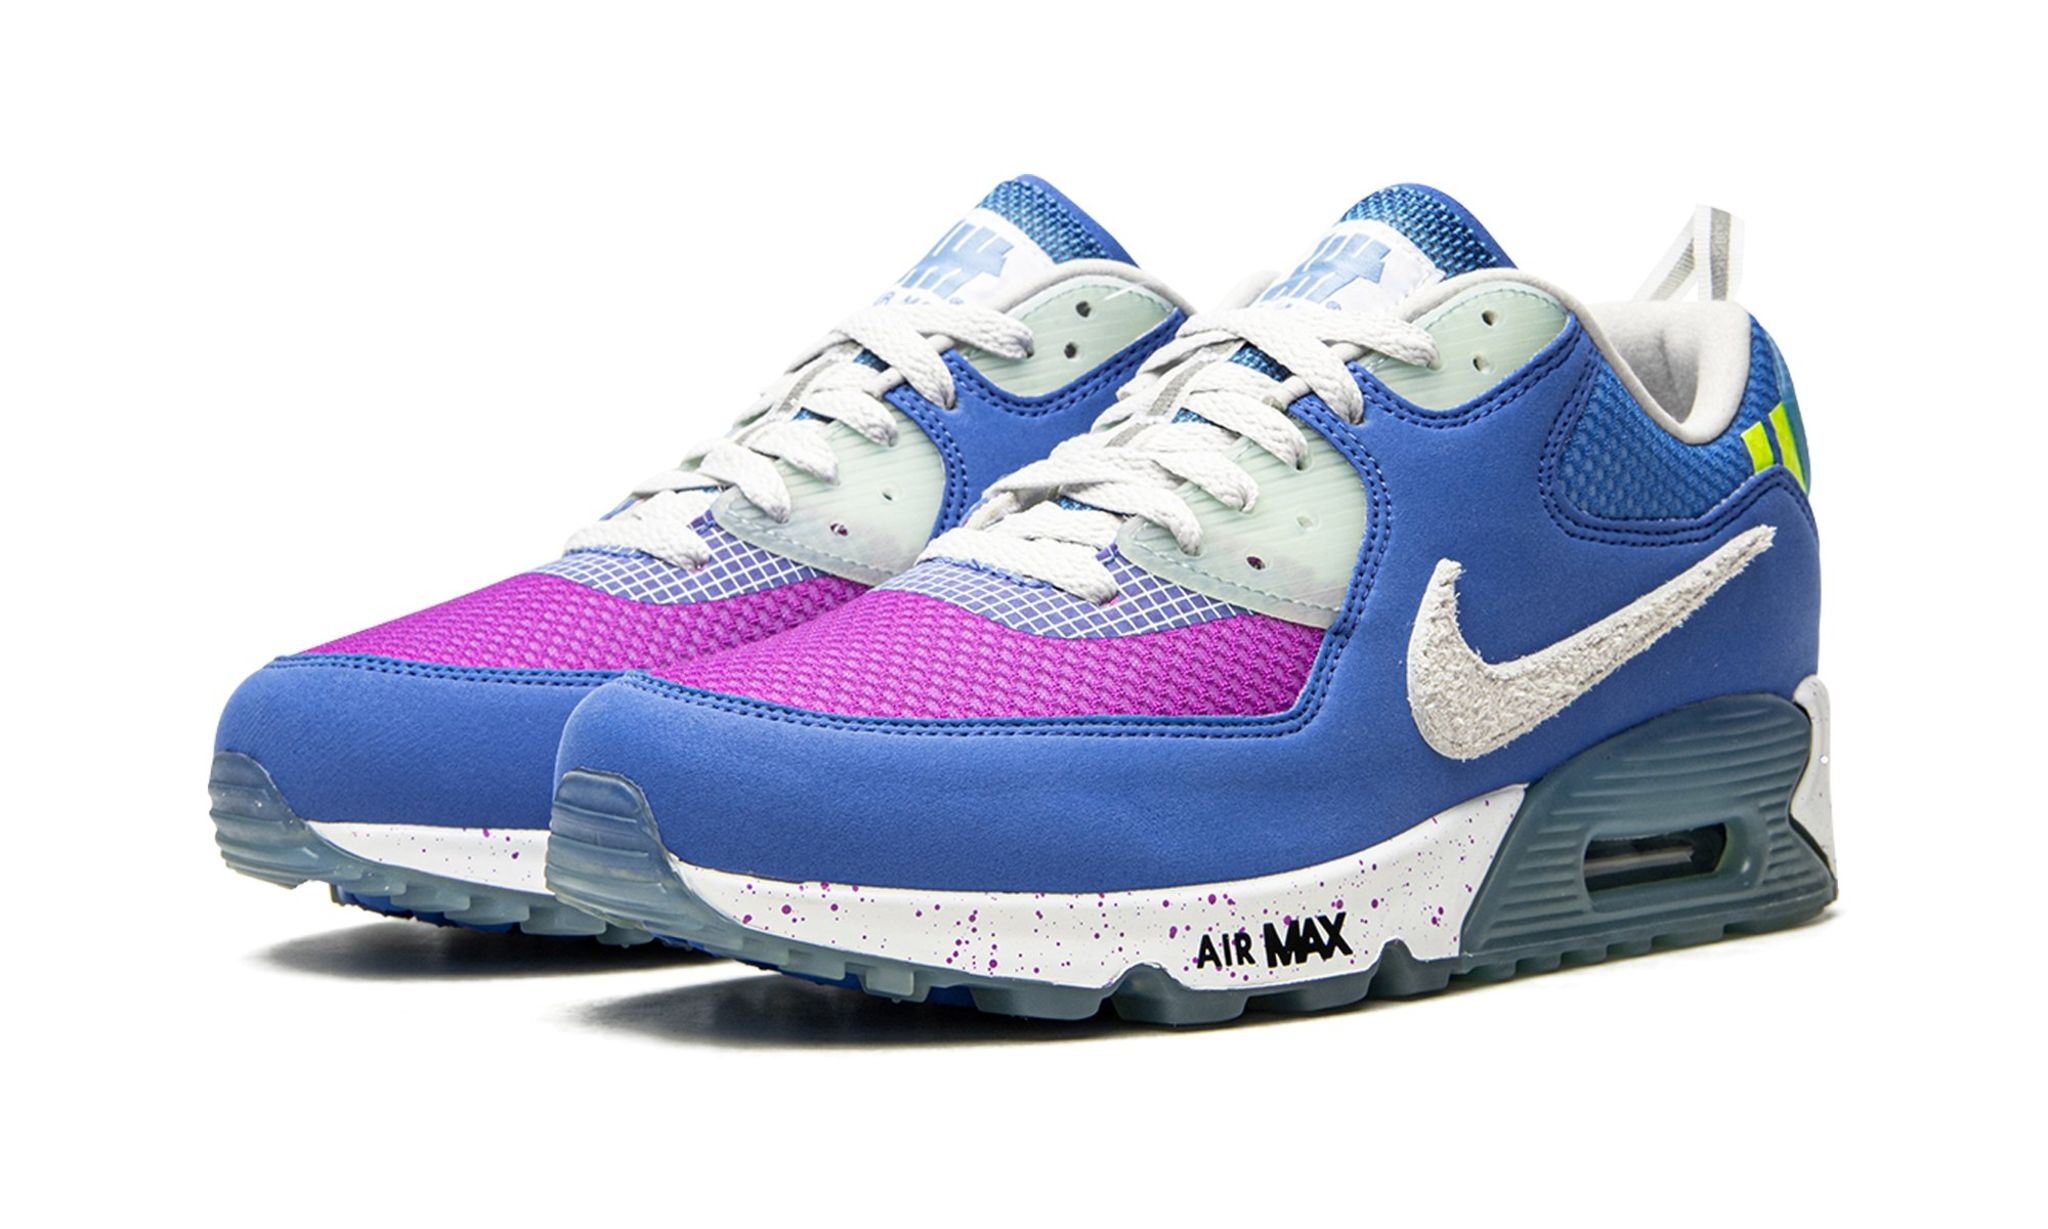 Air Max 90 "Undefeated - Pacific Blue" - 2